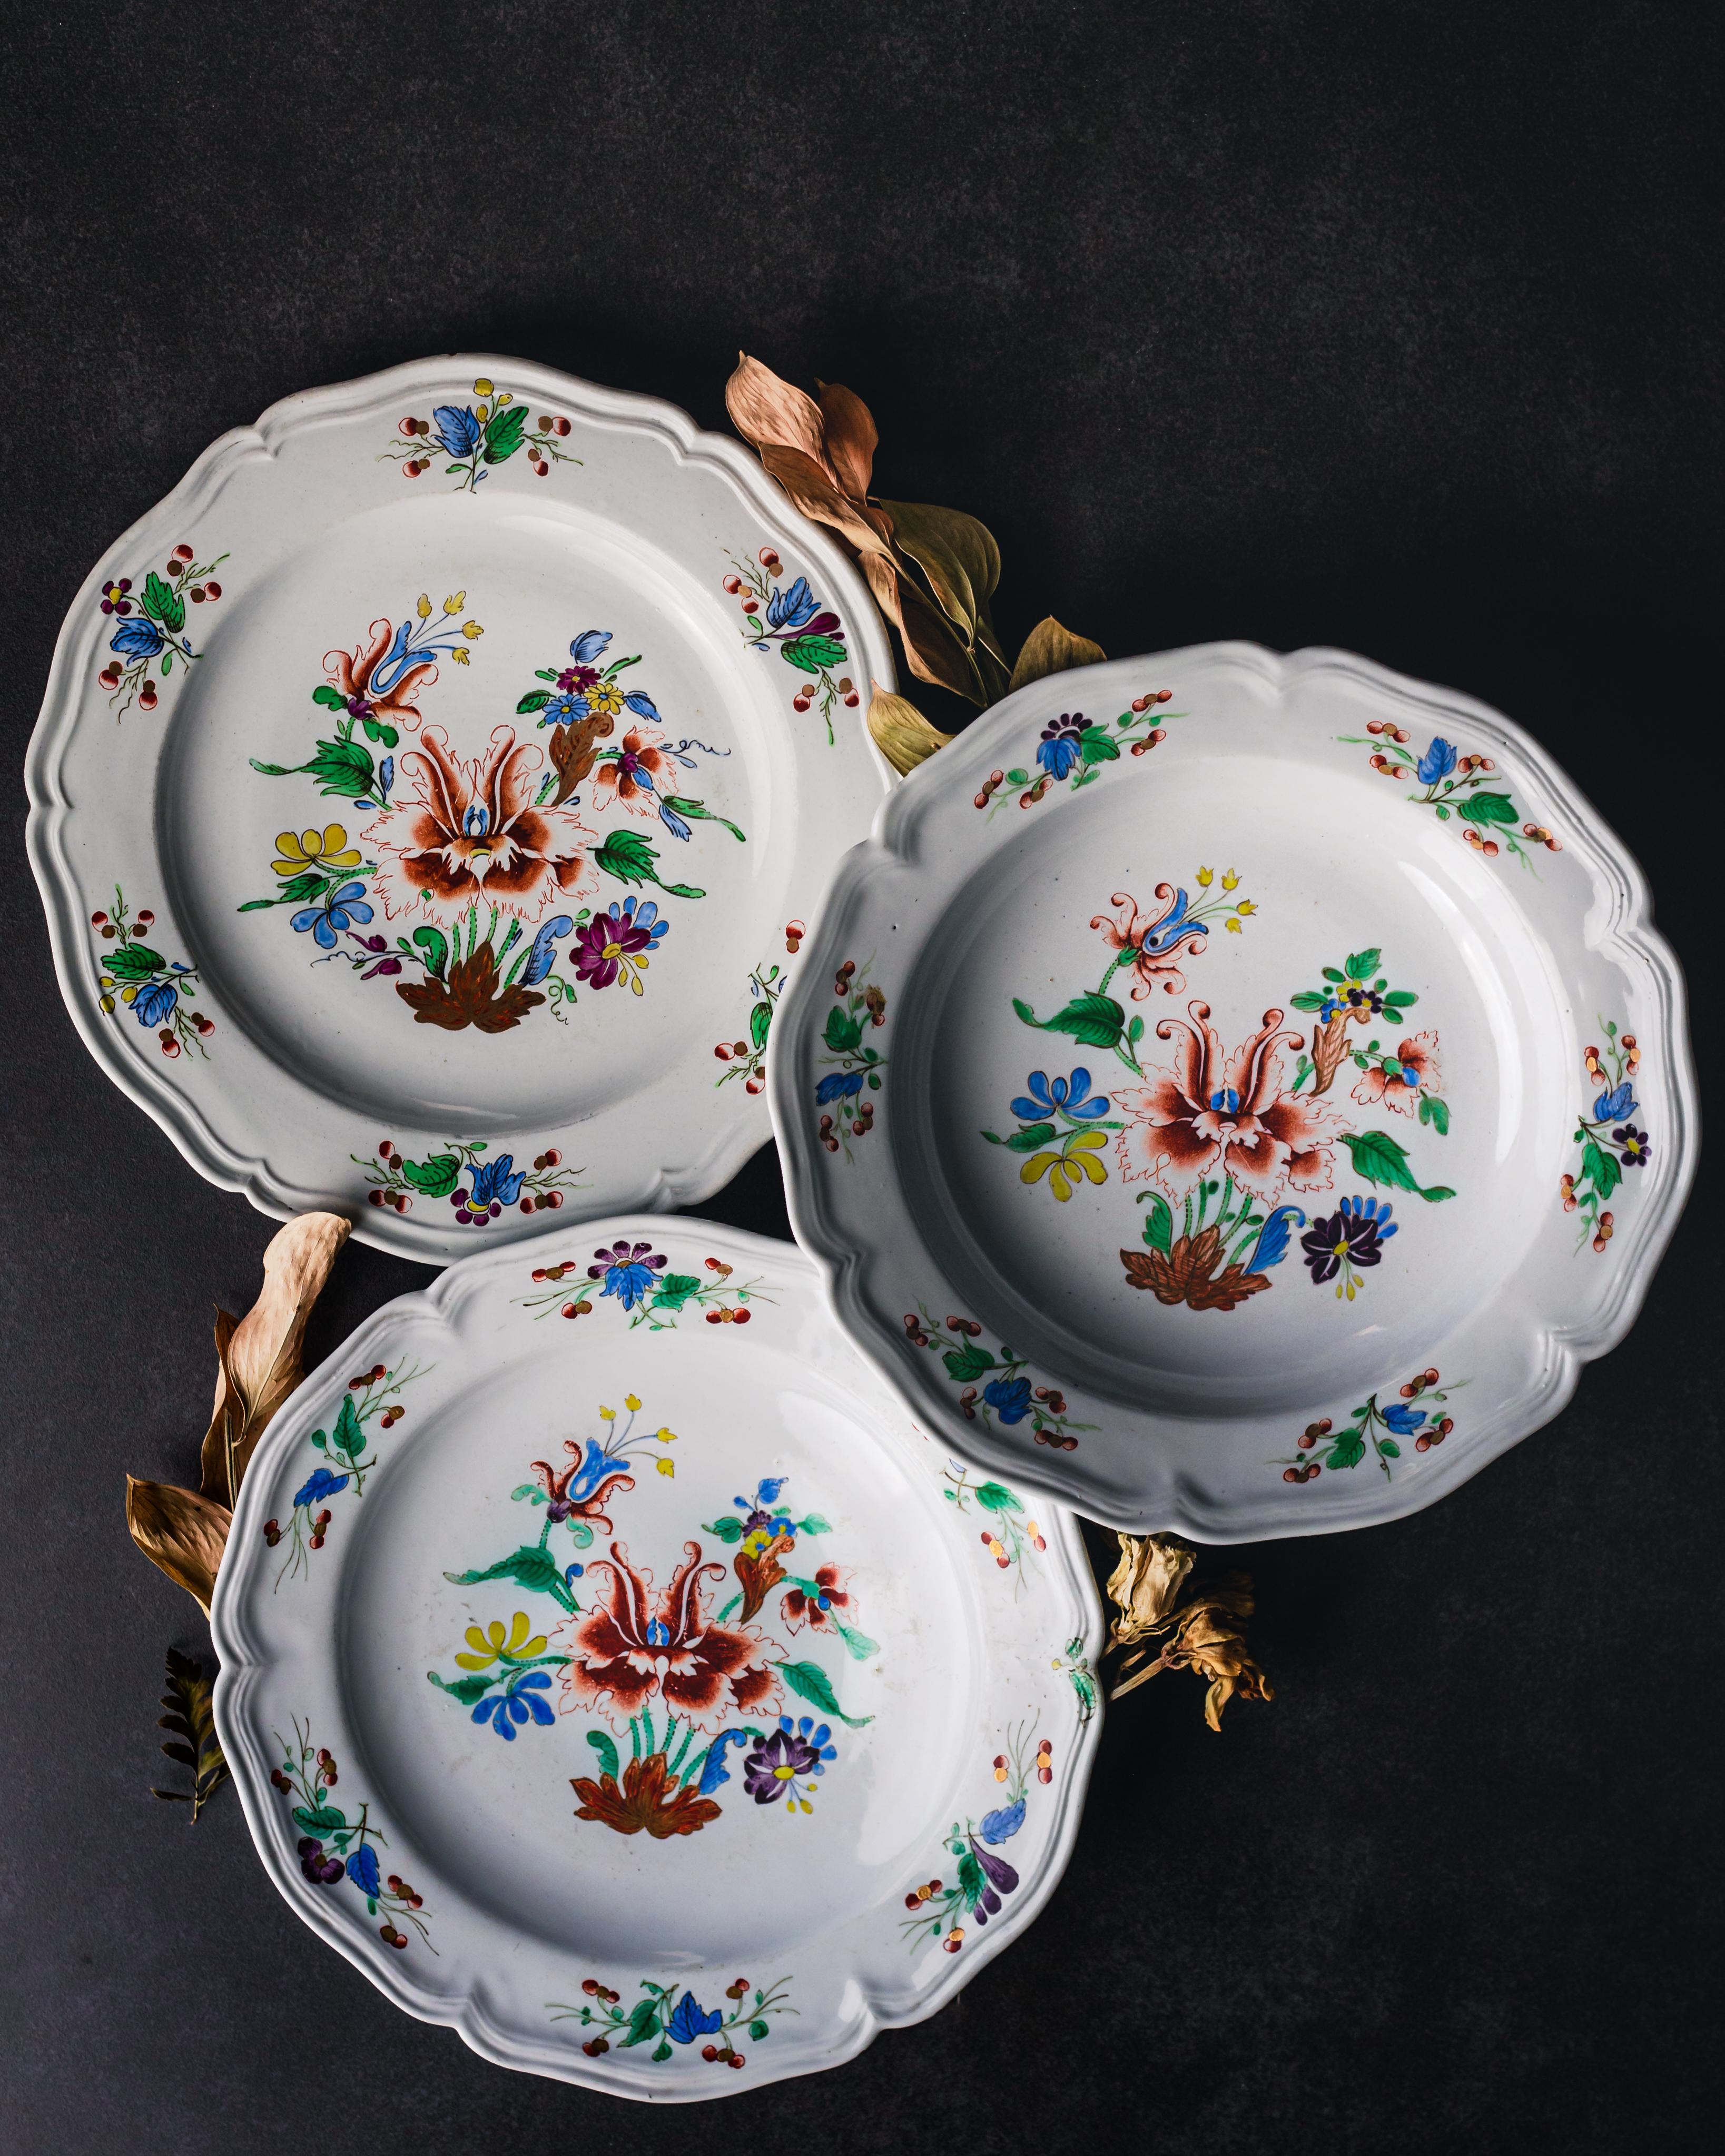 A dinner service comprising six dinner dishes and six soup dishes made by the Doccia Porcelain Manufactory, circa 1750.

Italy was the site of Europe’s first porcelain production: in Florence between 1575 and 1587 under the patronage of Francesco